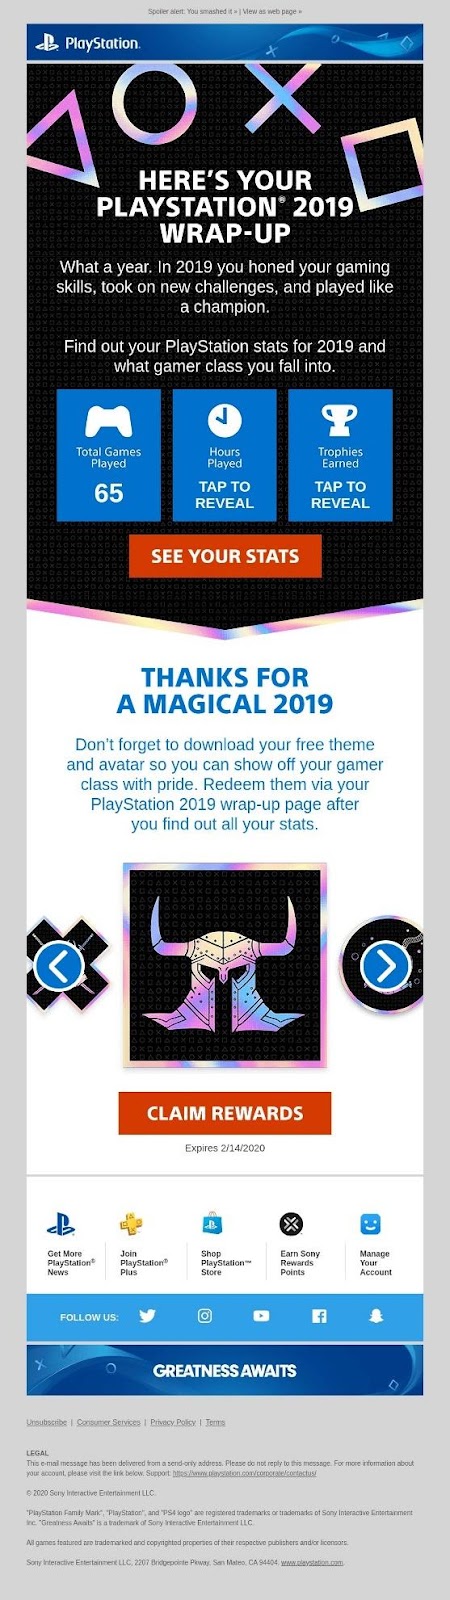 example of Playstation engaging email